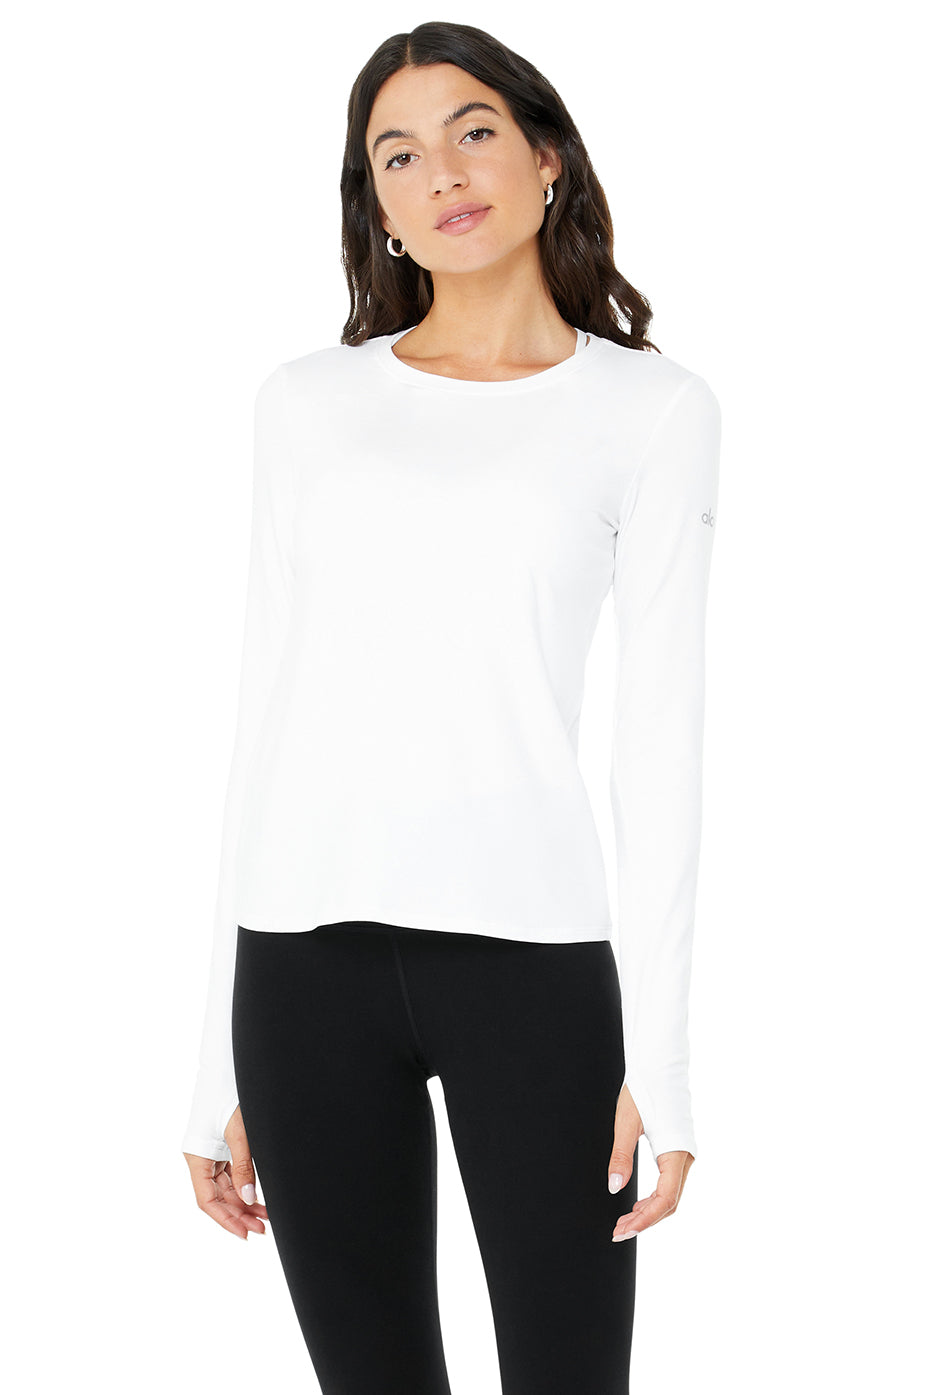 Buy Alo Yoga® Alosoft Crop Finesse Short Sleeve Top - White At 41% Off